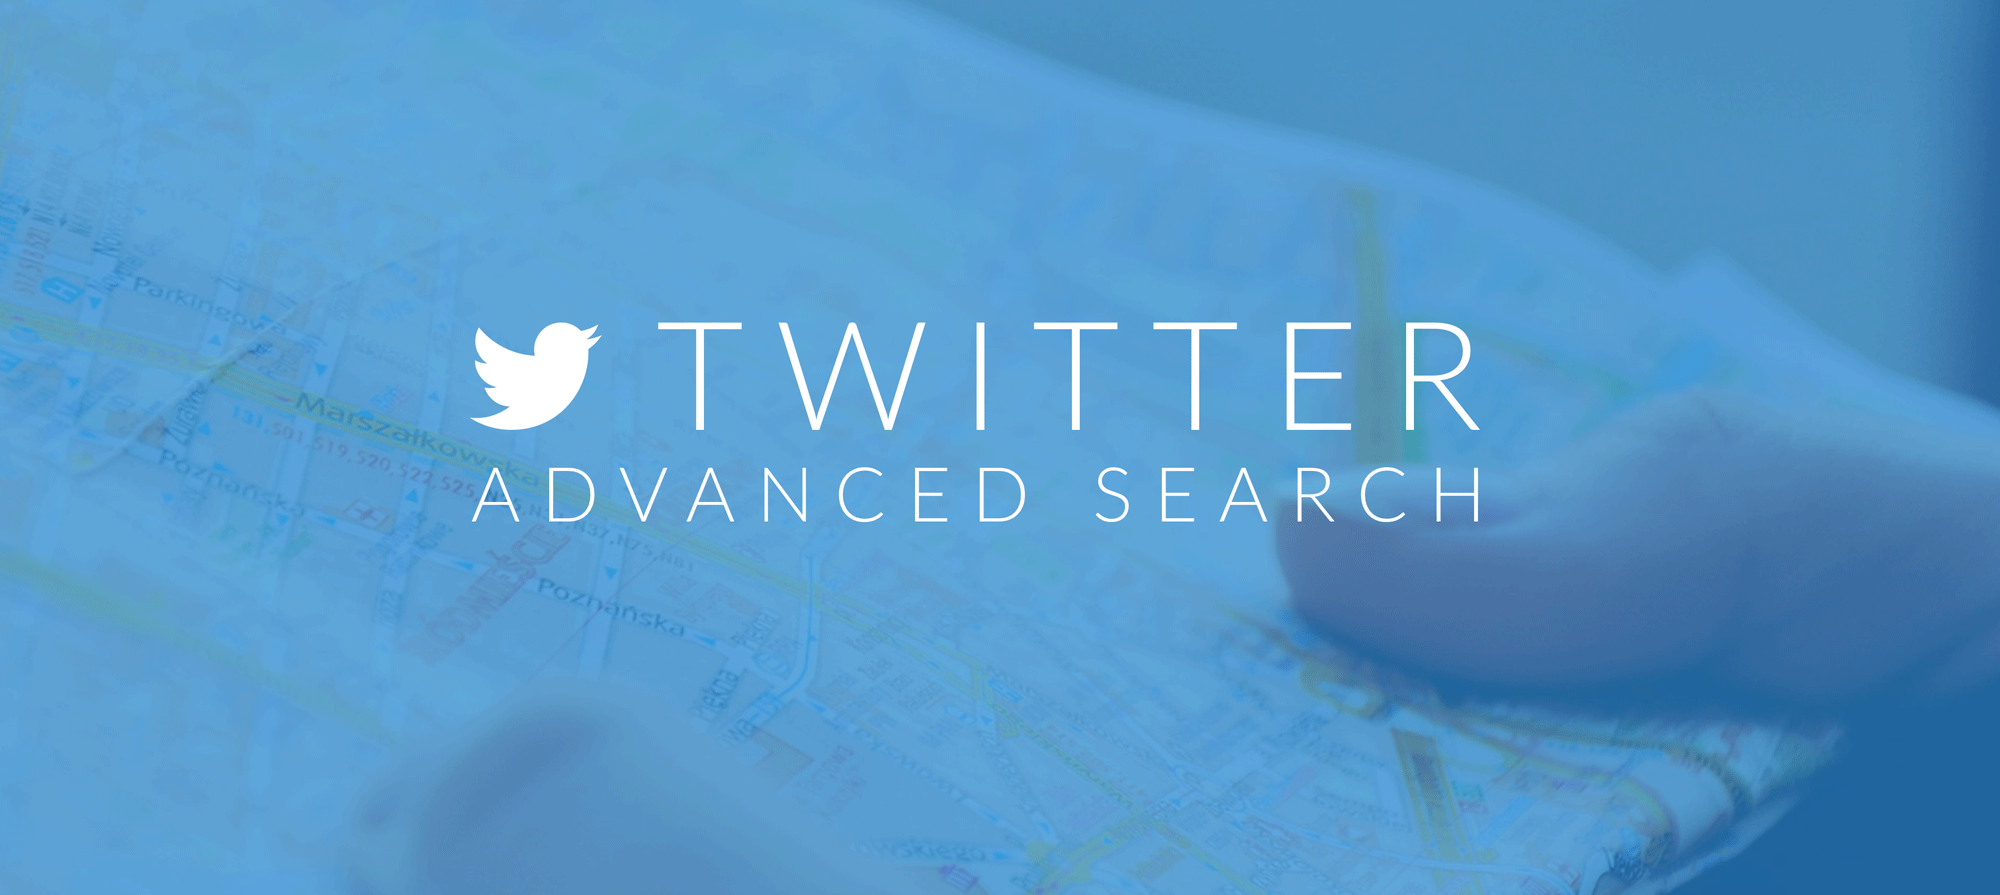 The Superhuman Guide to Twitter Advanced Search: 23 Hidden Ways to Use Advanced Search for Marketing and Sales